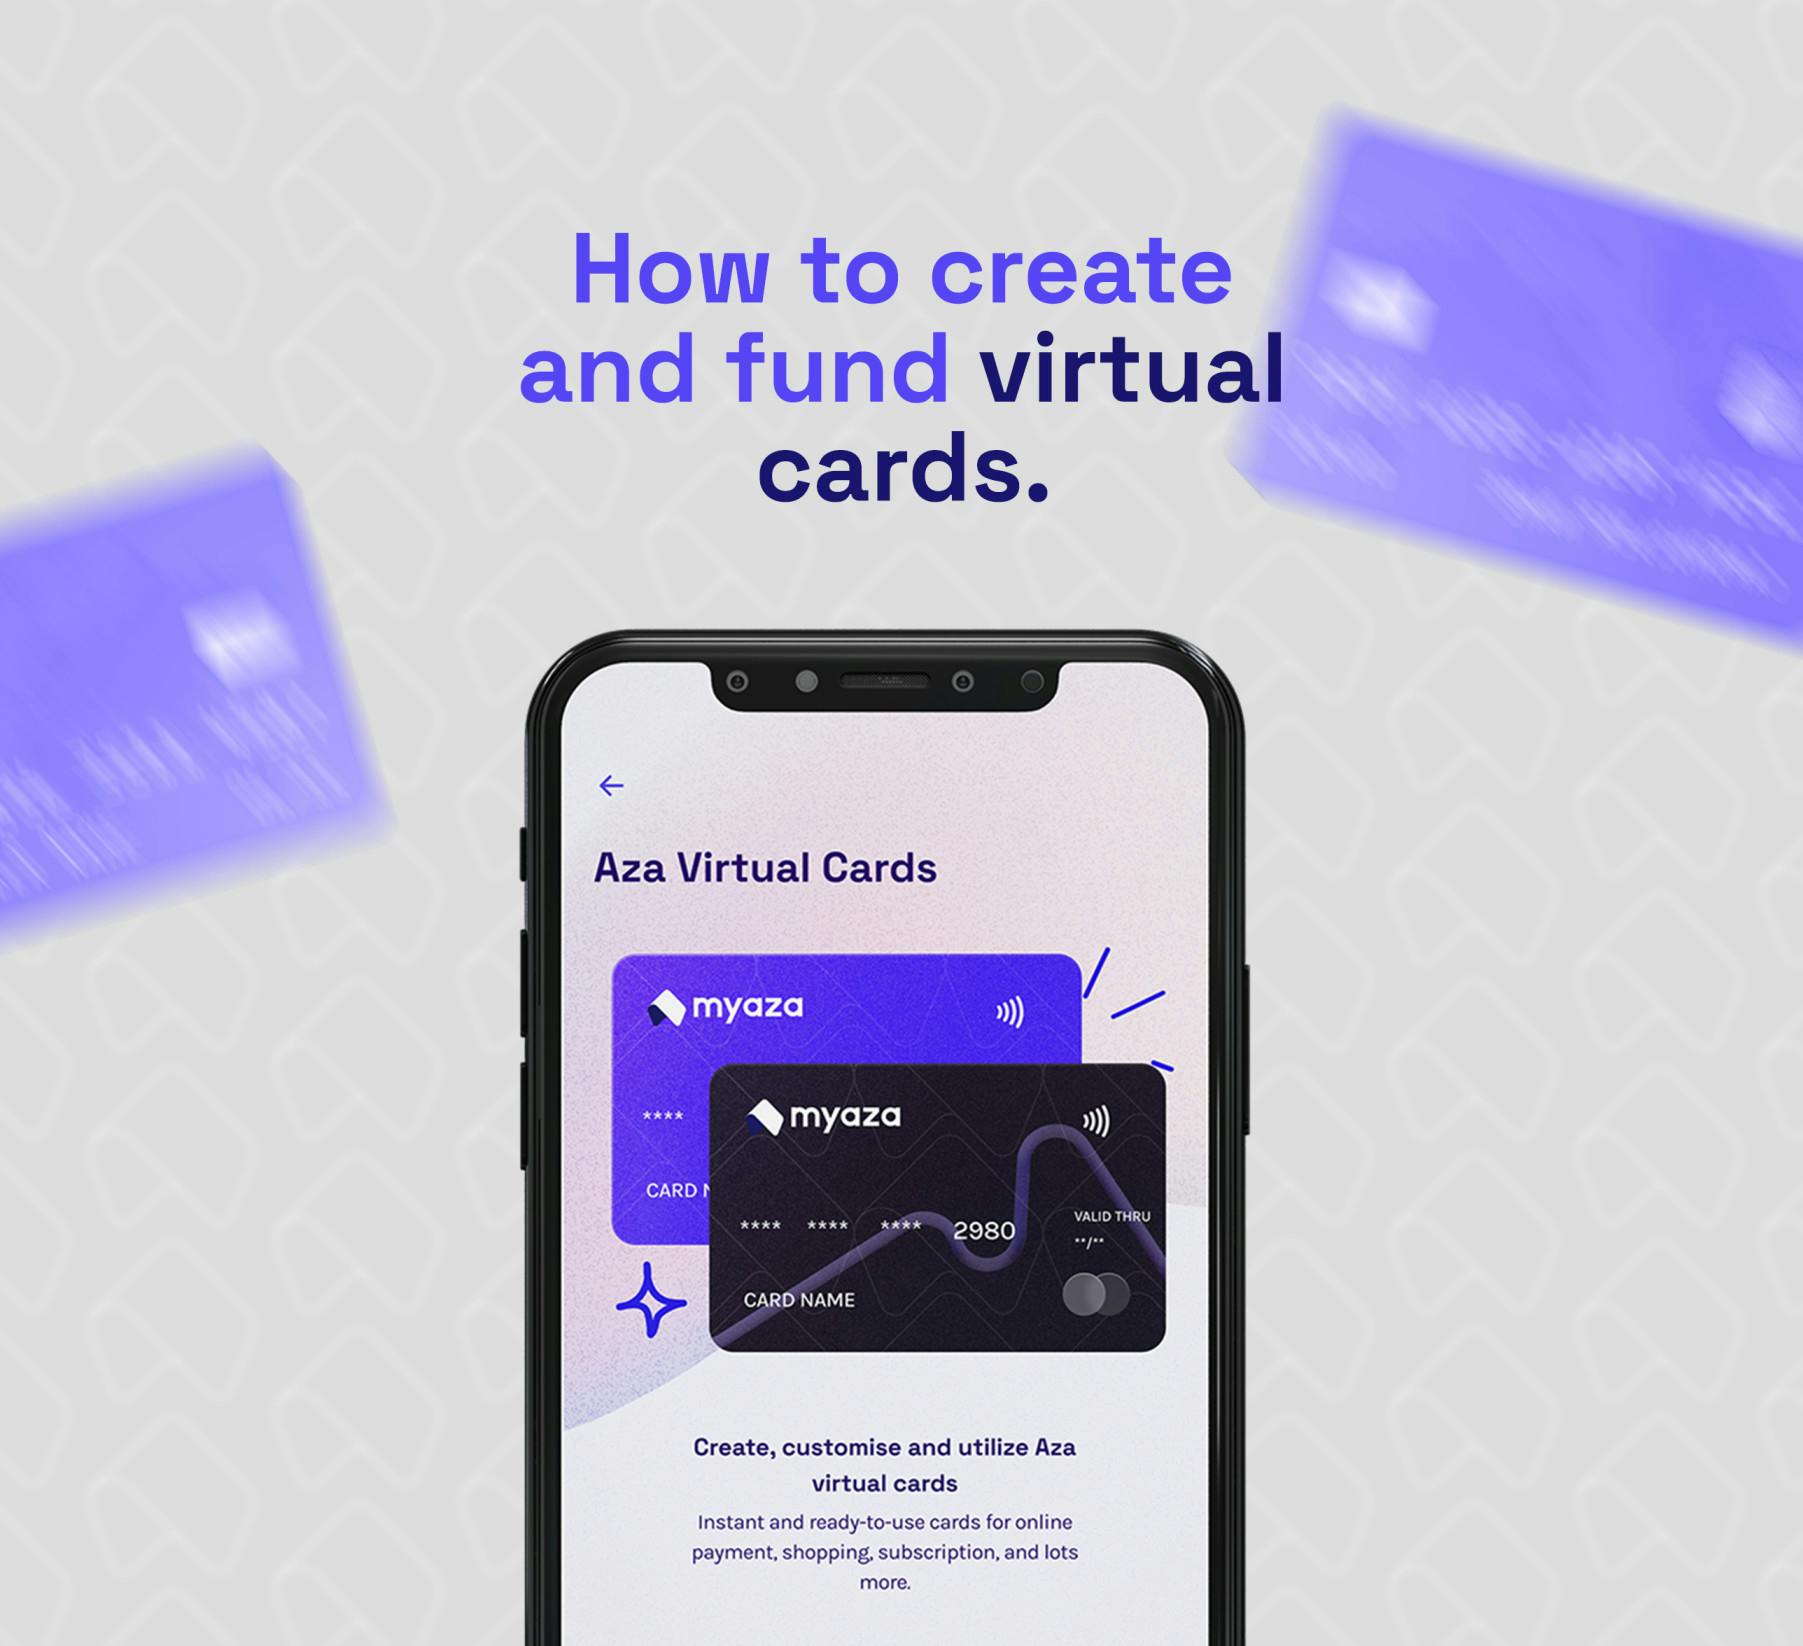 How to create and fund virtual cards